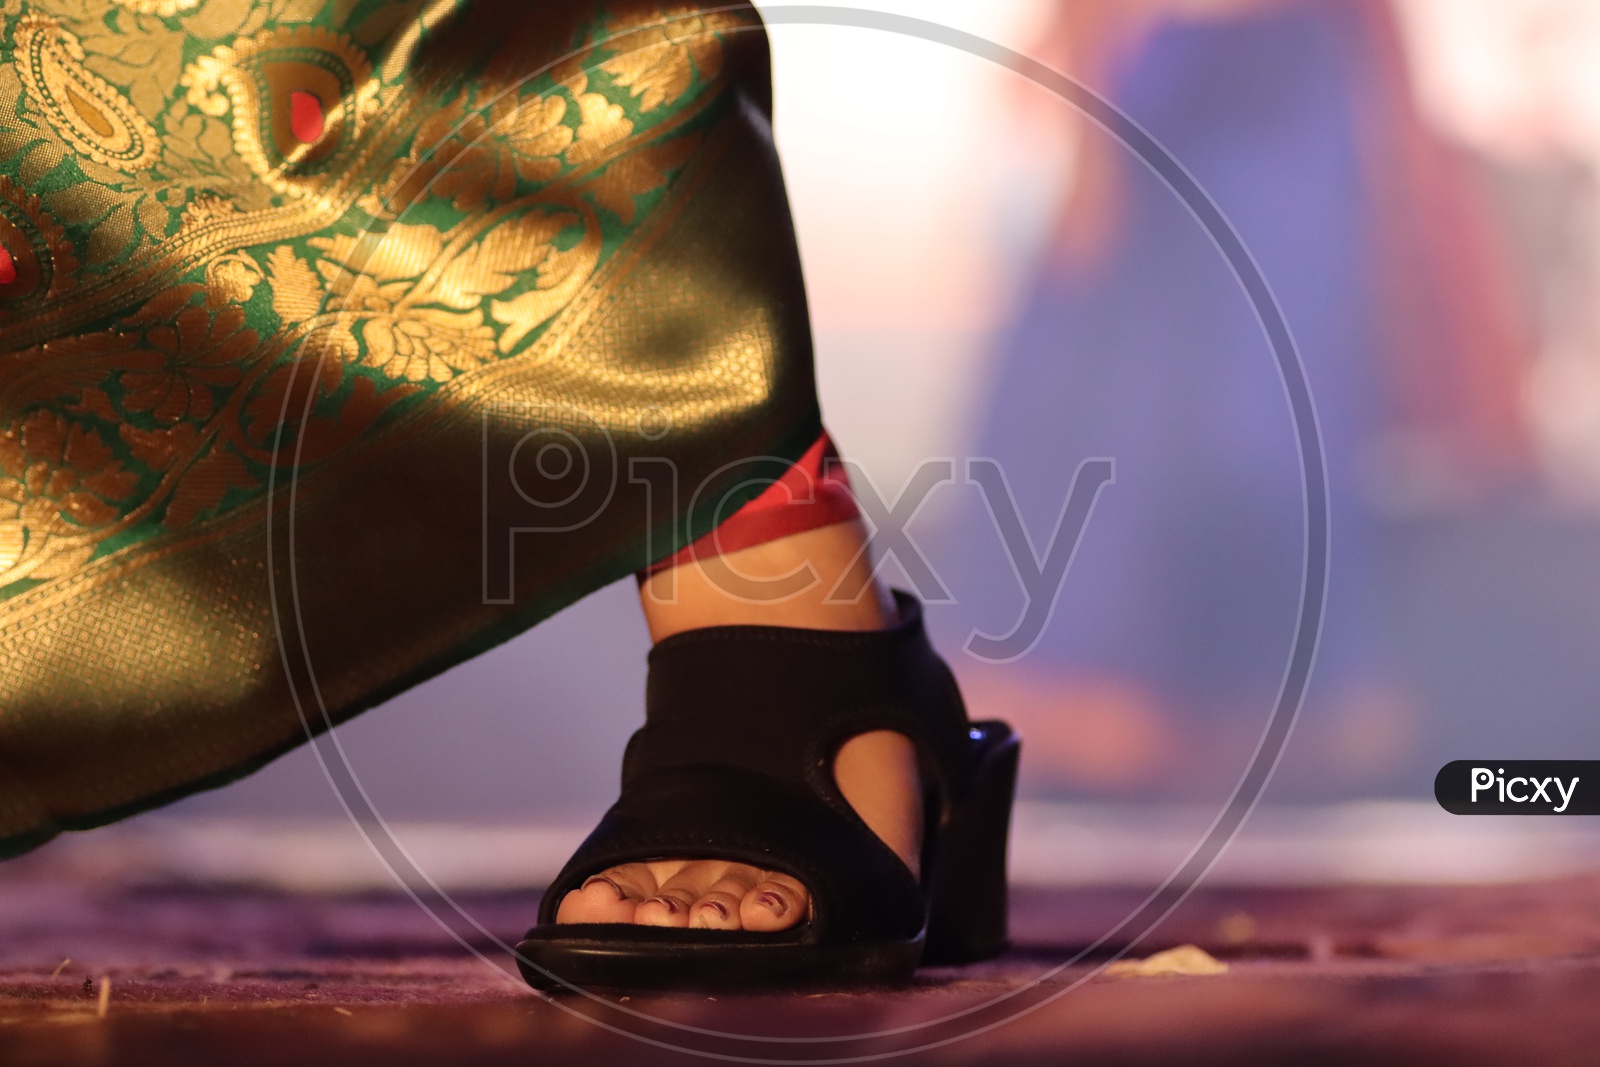 Feet Closeup Of a Woman Wearing Saree  Walking On Stage With Heel Sandal Footwear And Neon Lights